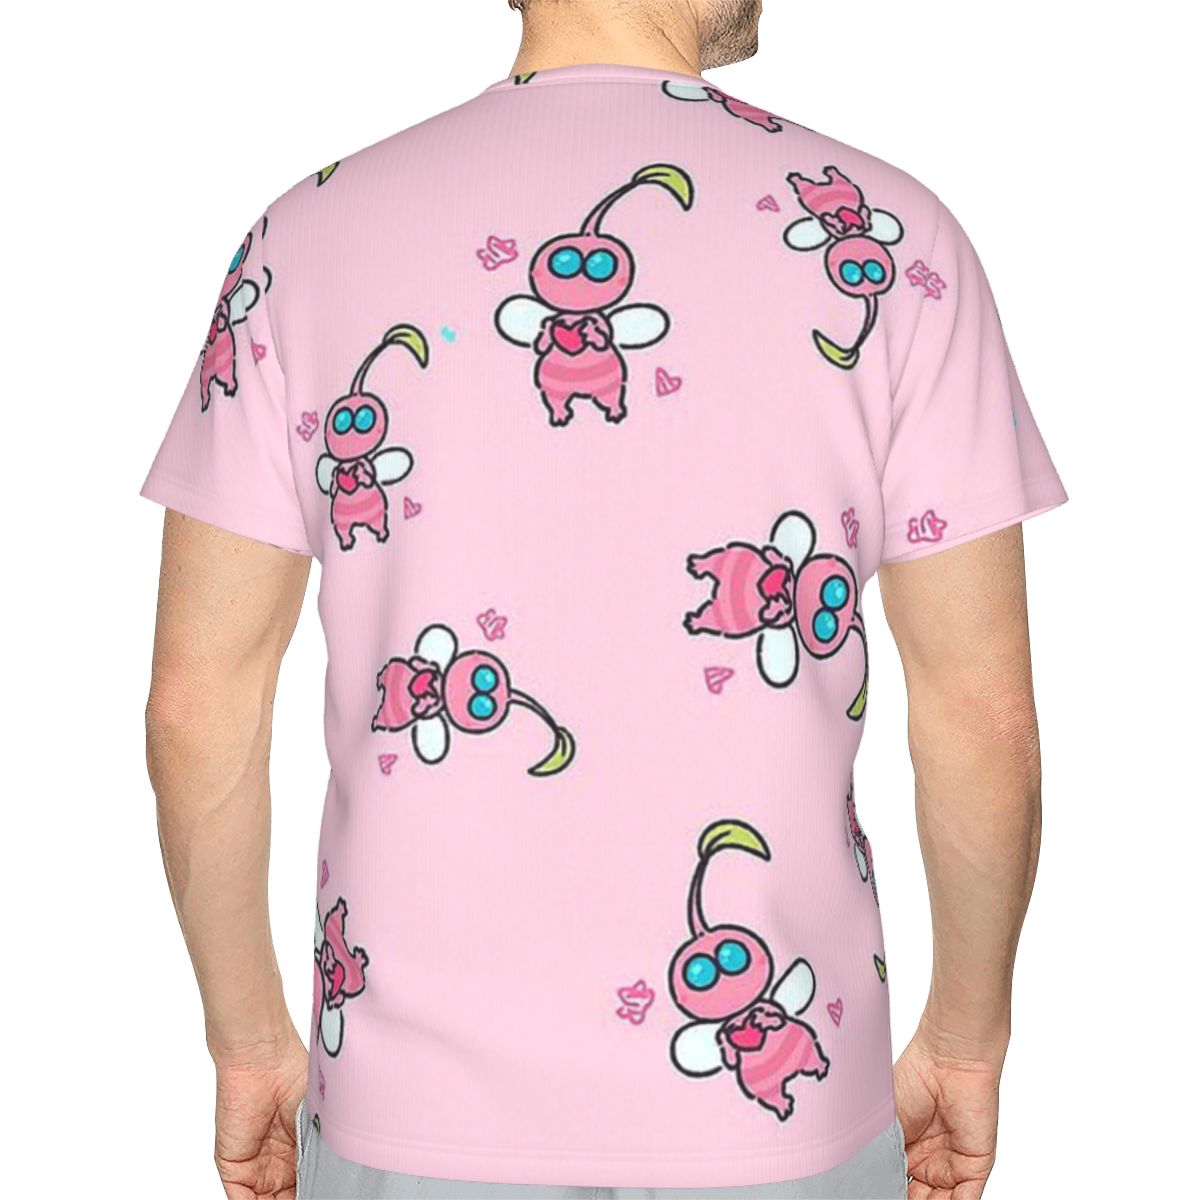 Pikmin Colorful Game Polyester TShirt for Men Pink Soft Summer Sweatshirts Thin T Shirt Novelty Fluffy 1 - Pikmin Plush